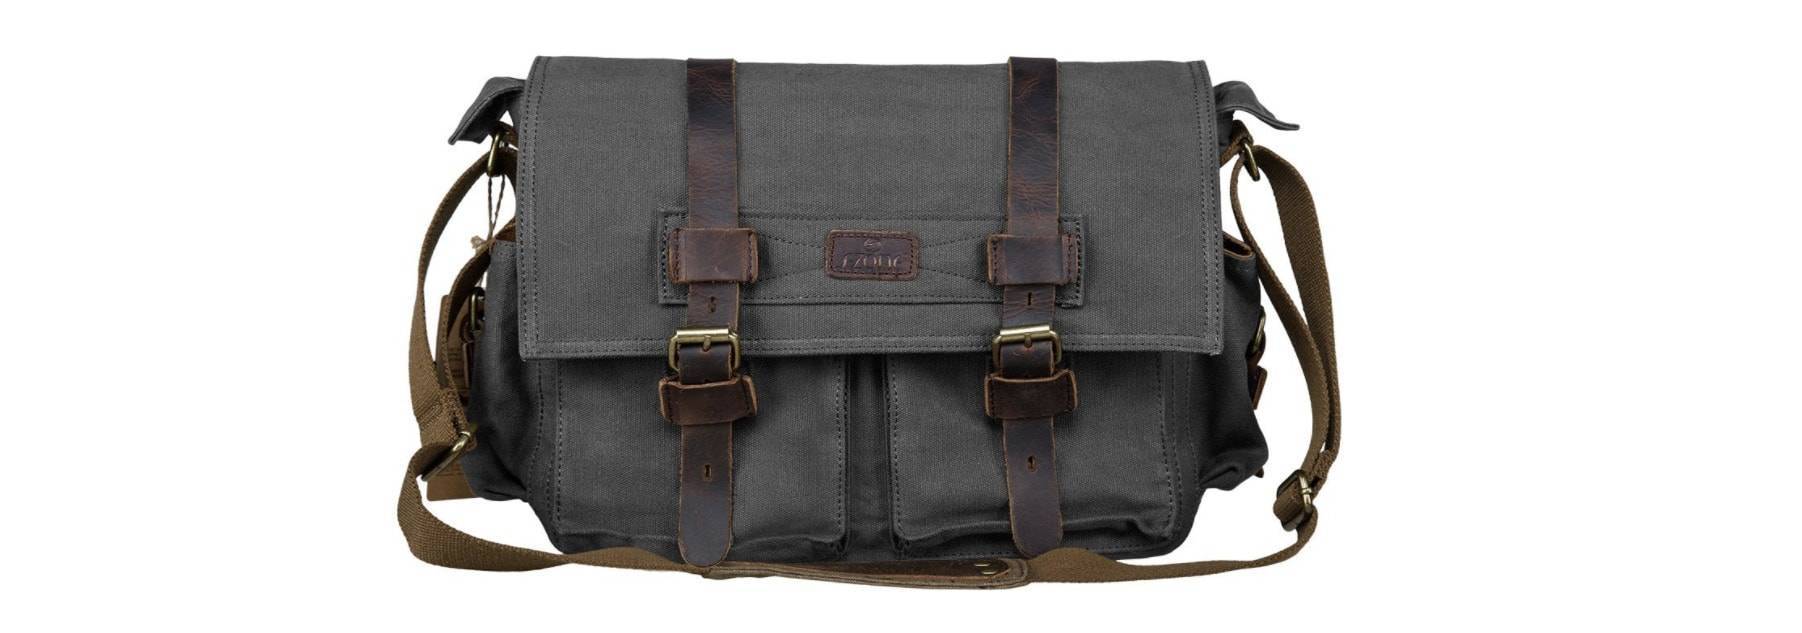 A gray and brown camera bag with buckles.